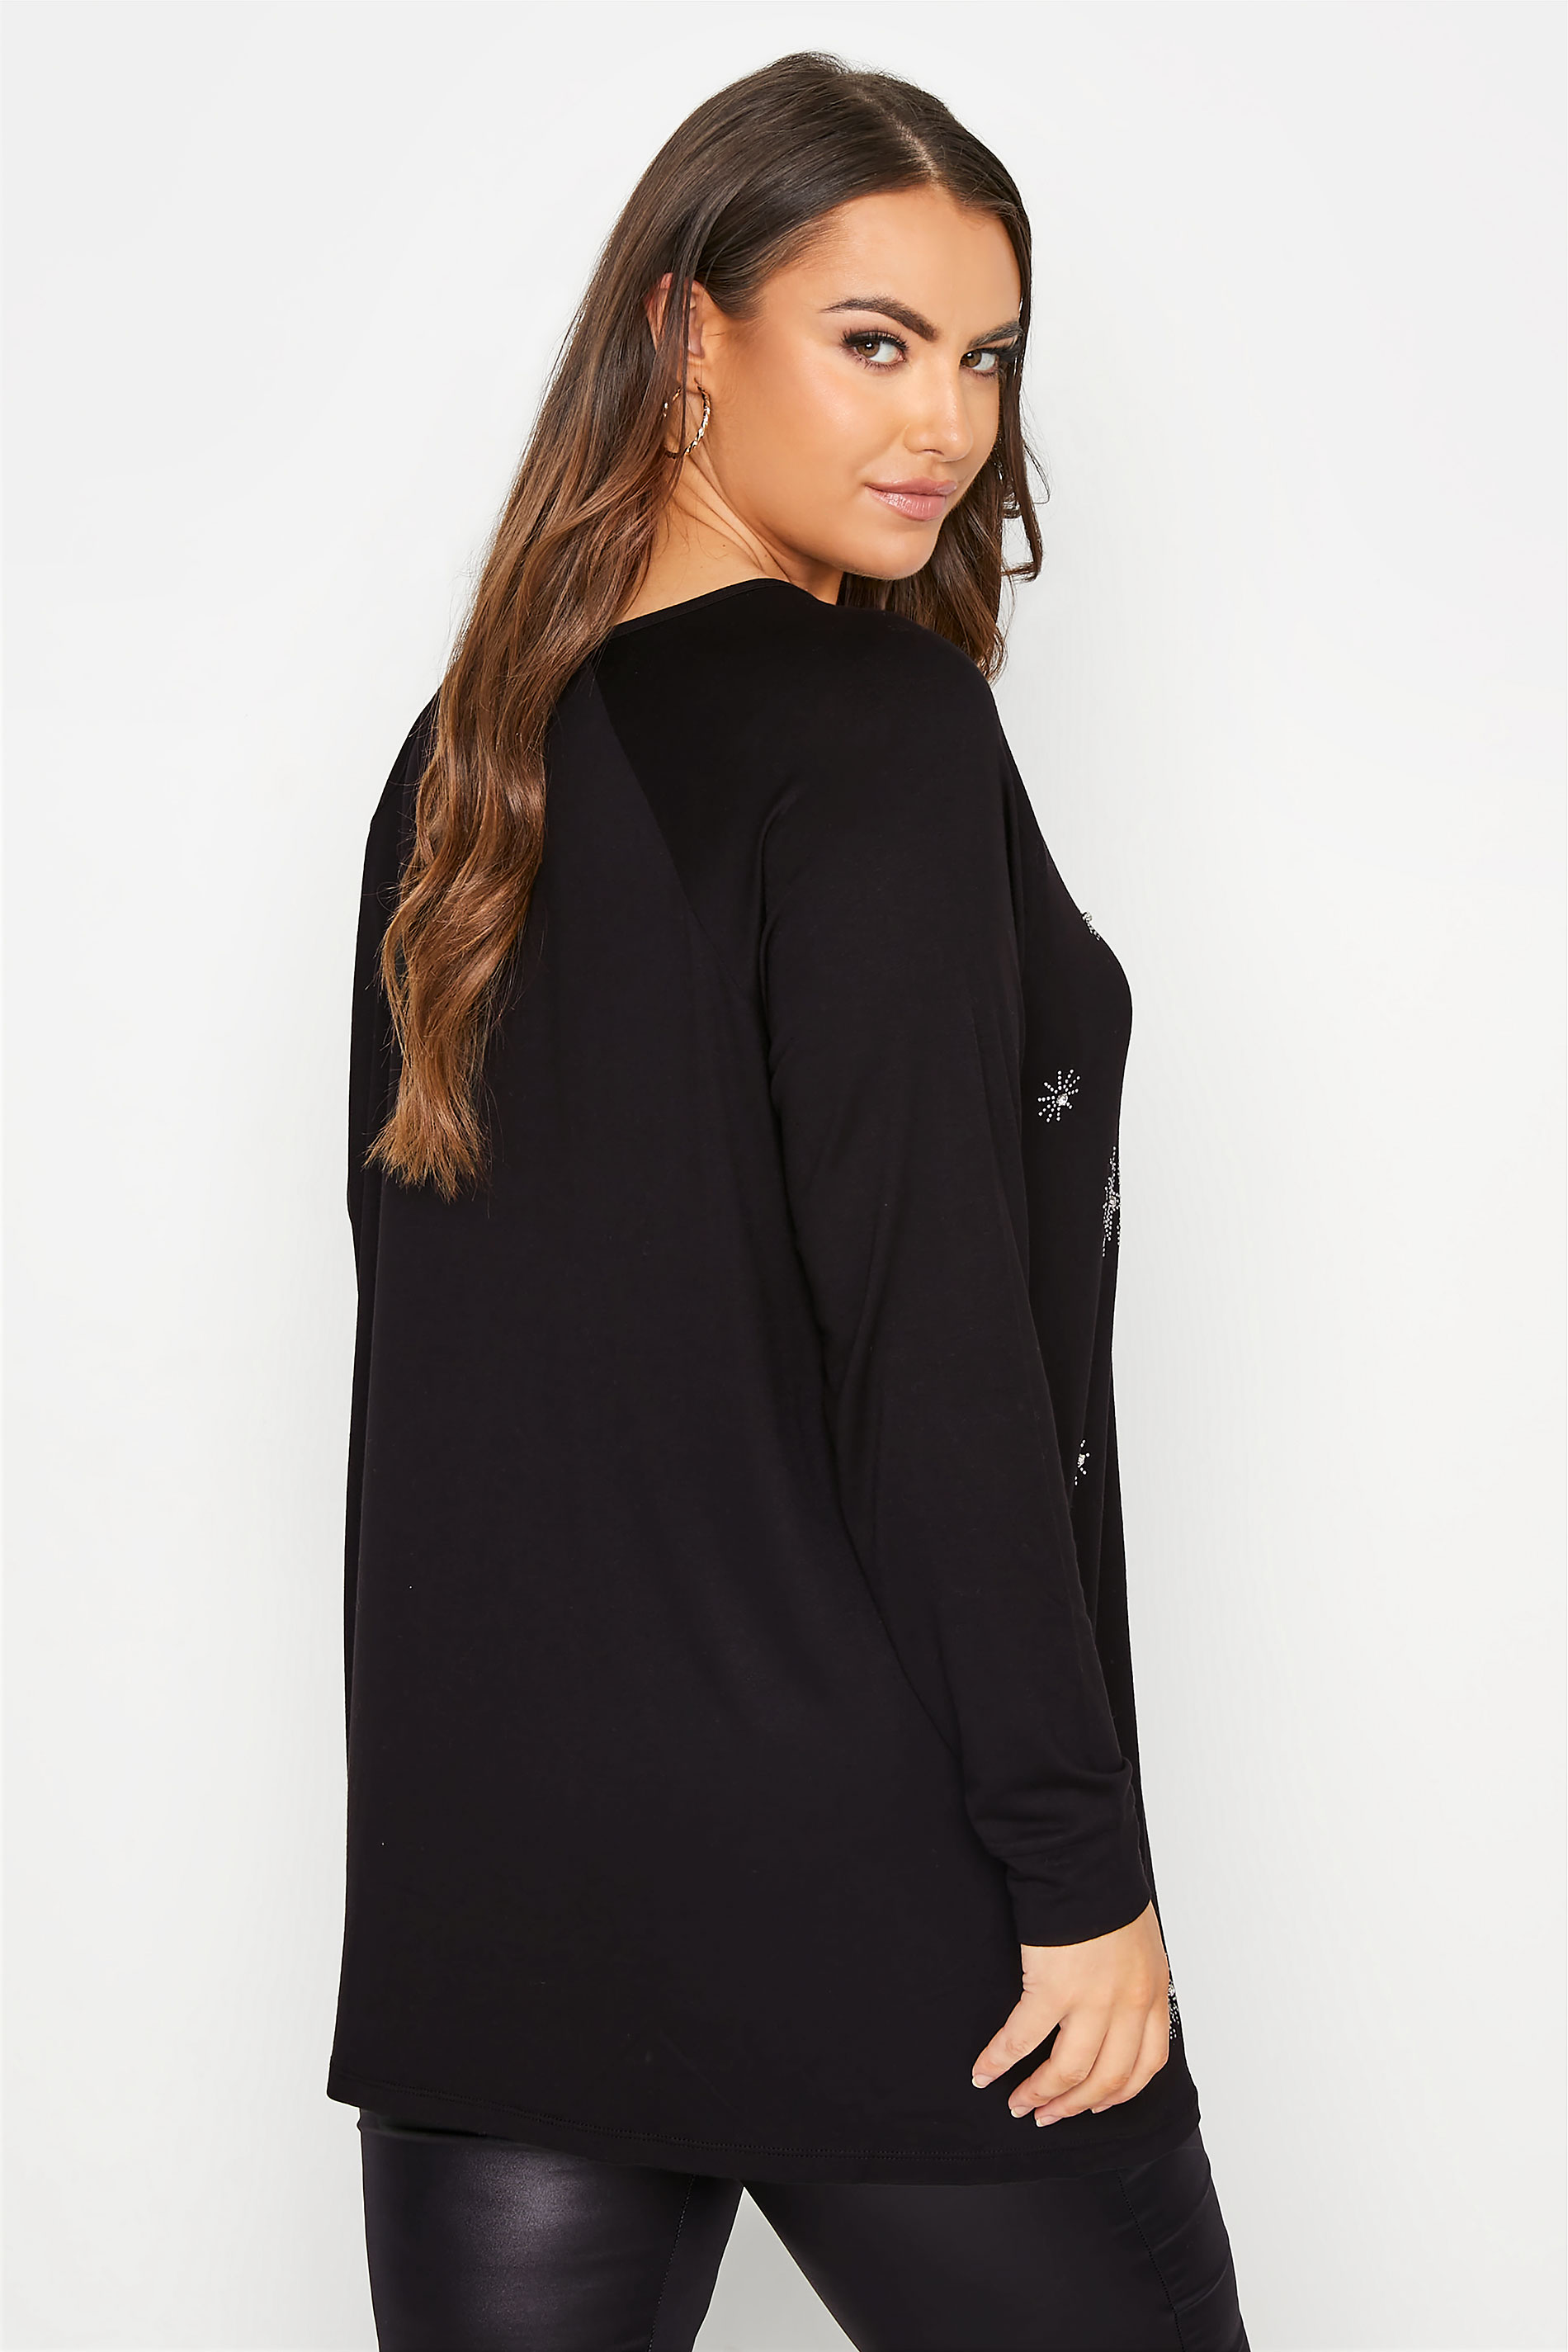 Plus Size Black Star Embellished Top | Yours Clothing 3